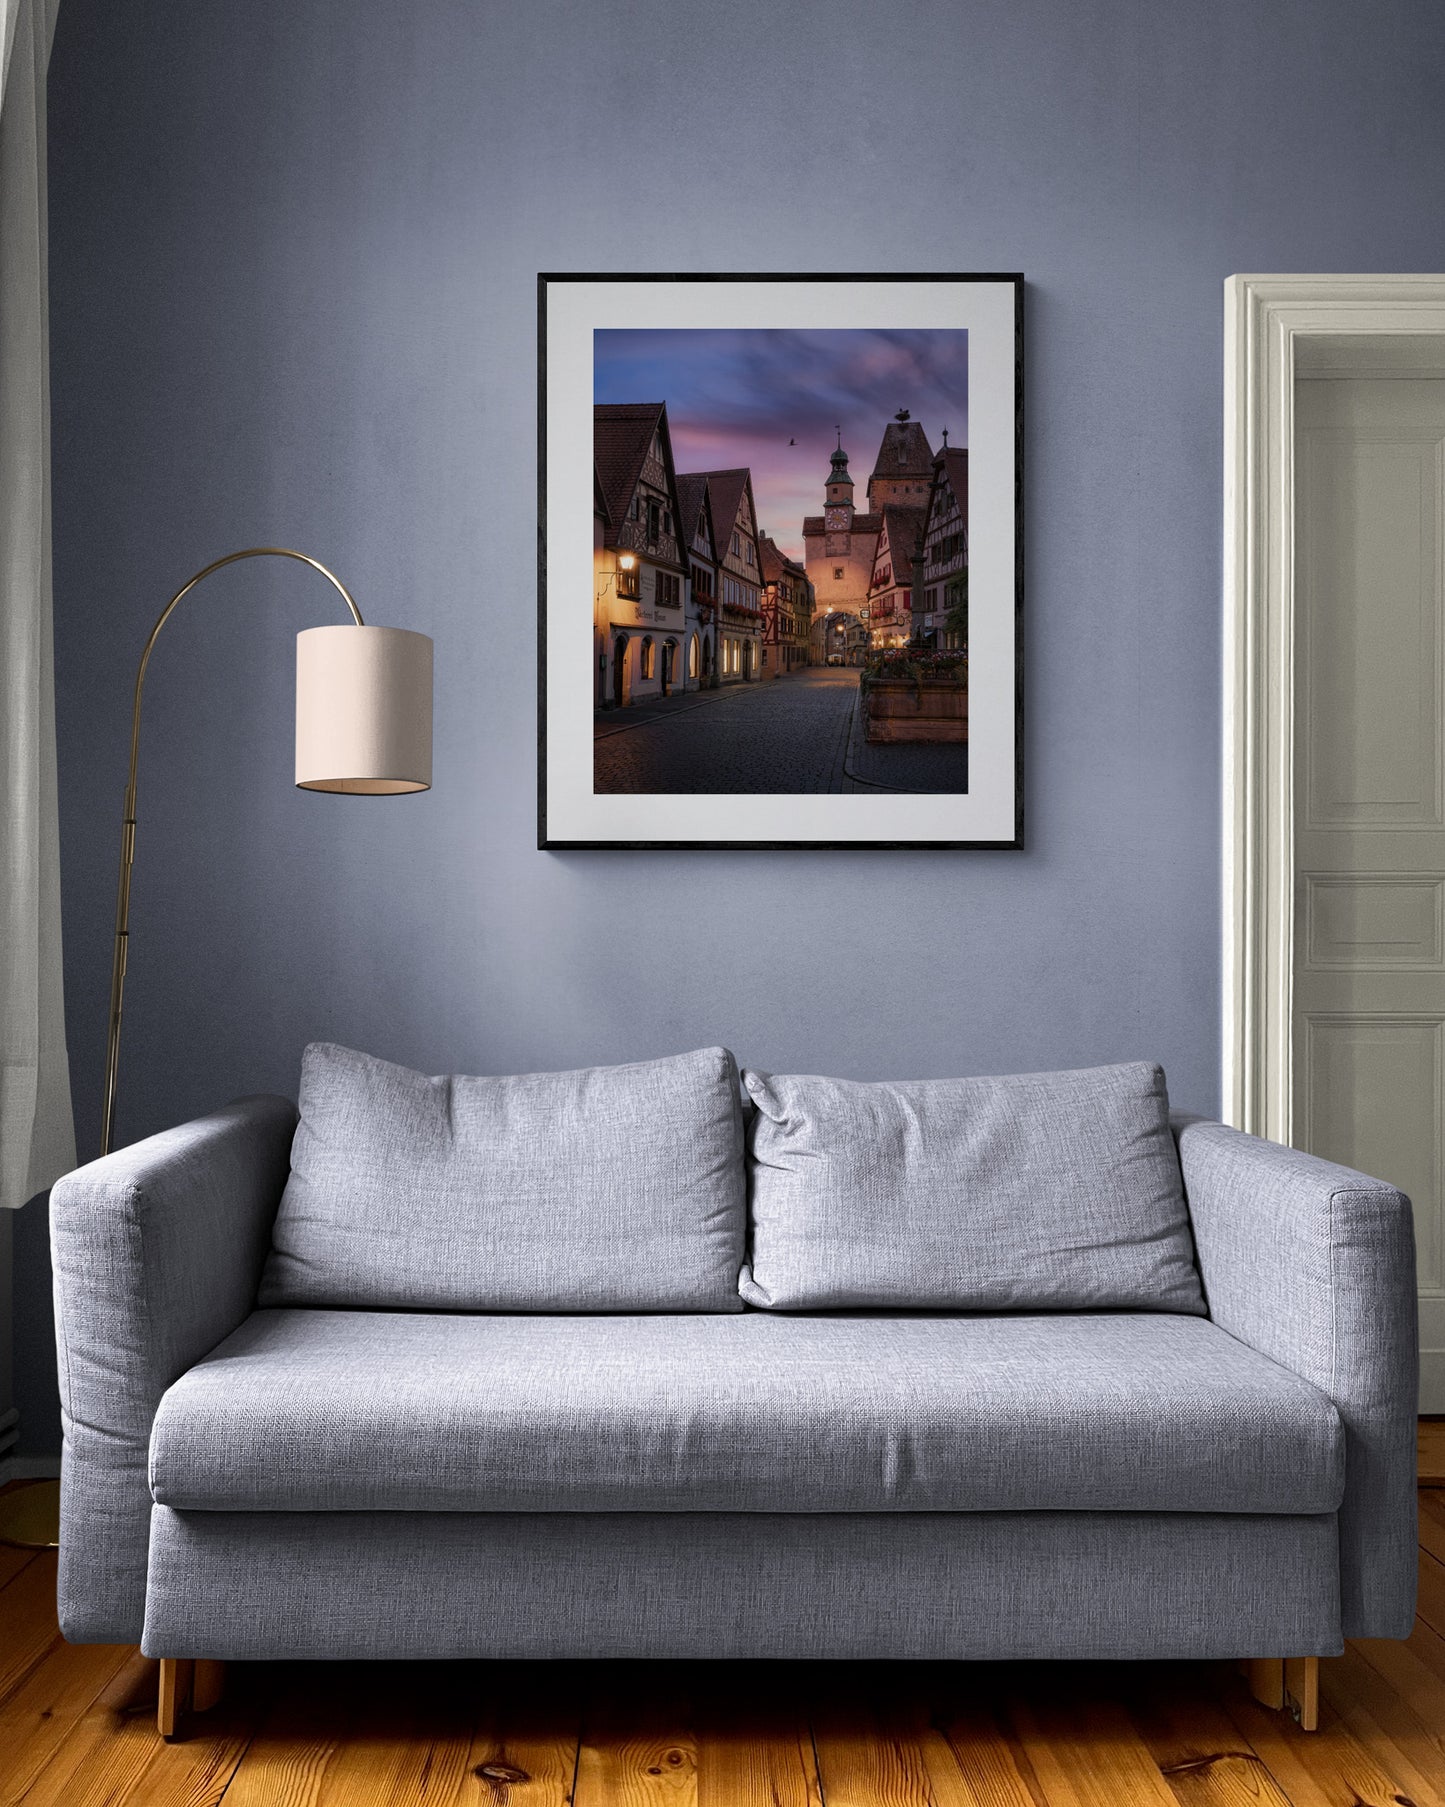 Image Title: Daddy is coming Photographer: Marcus Danz Location: Rothenburg ob der Tauber, Germany  Image description: Beautiful sunset view of the Markus Tower n the romantic town of Rothenburg ob der Tauber. High quality Fine Art print up to 36 inch / around 90 centimeters on Hahnemühle paper available. Large variant in living room.